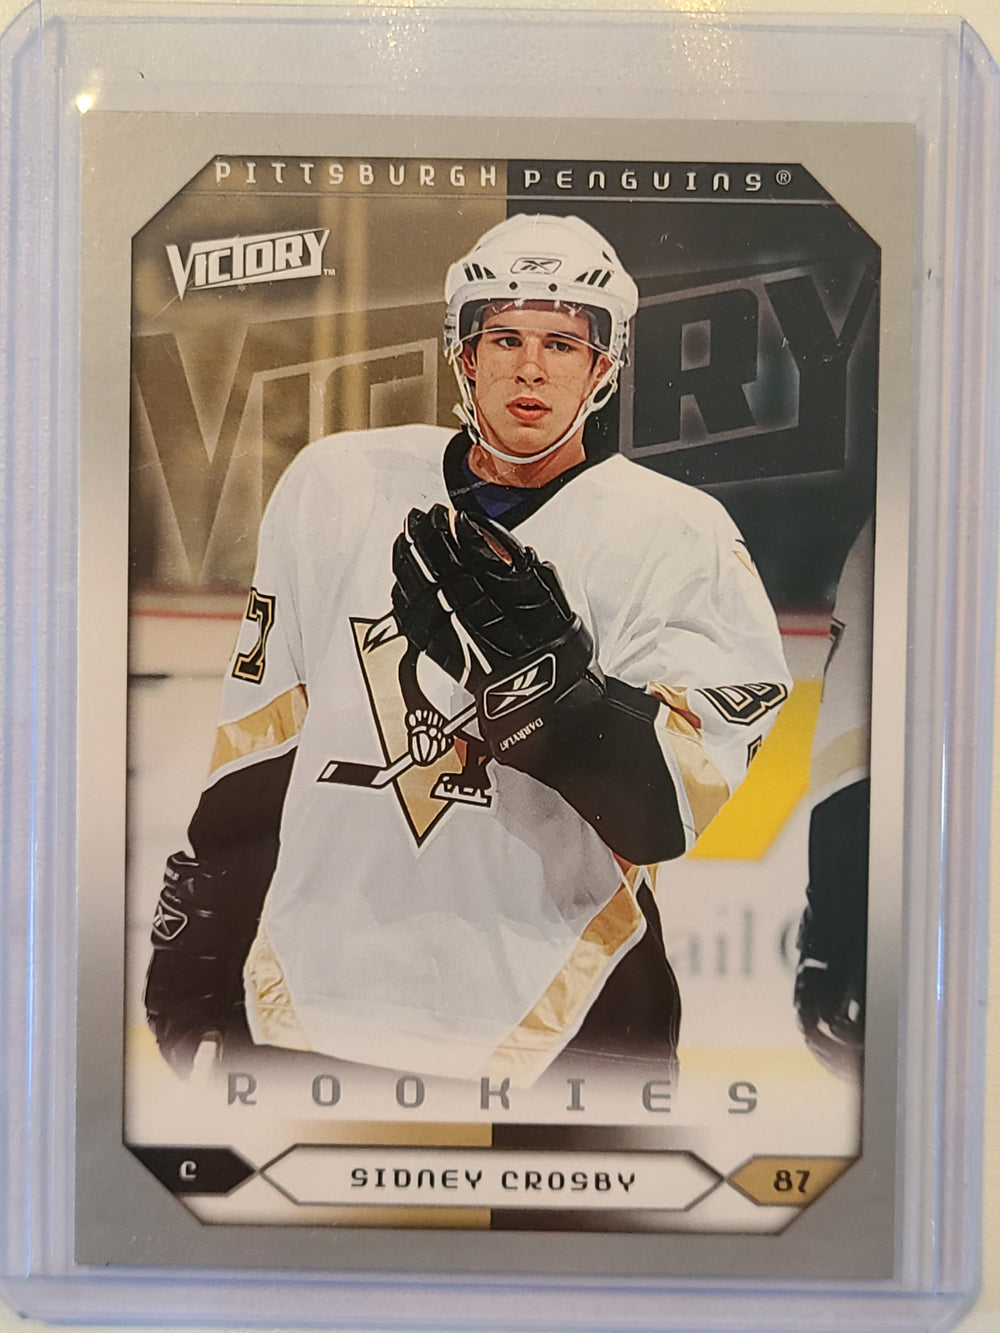 2005-06 Victory Rookies #285 Sidney Crosby Pittsburgh Penquins